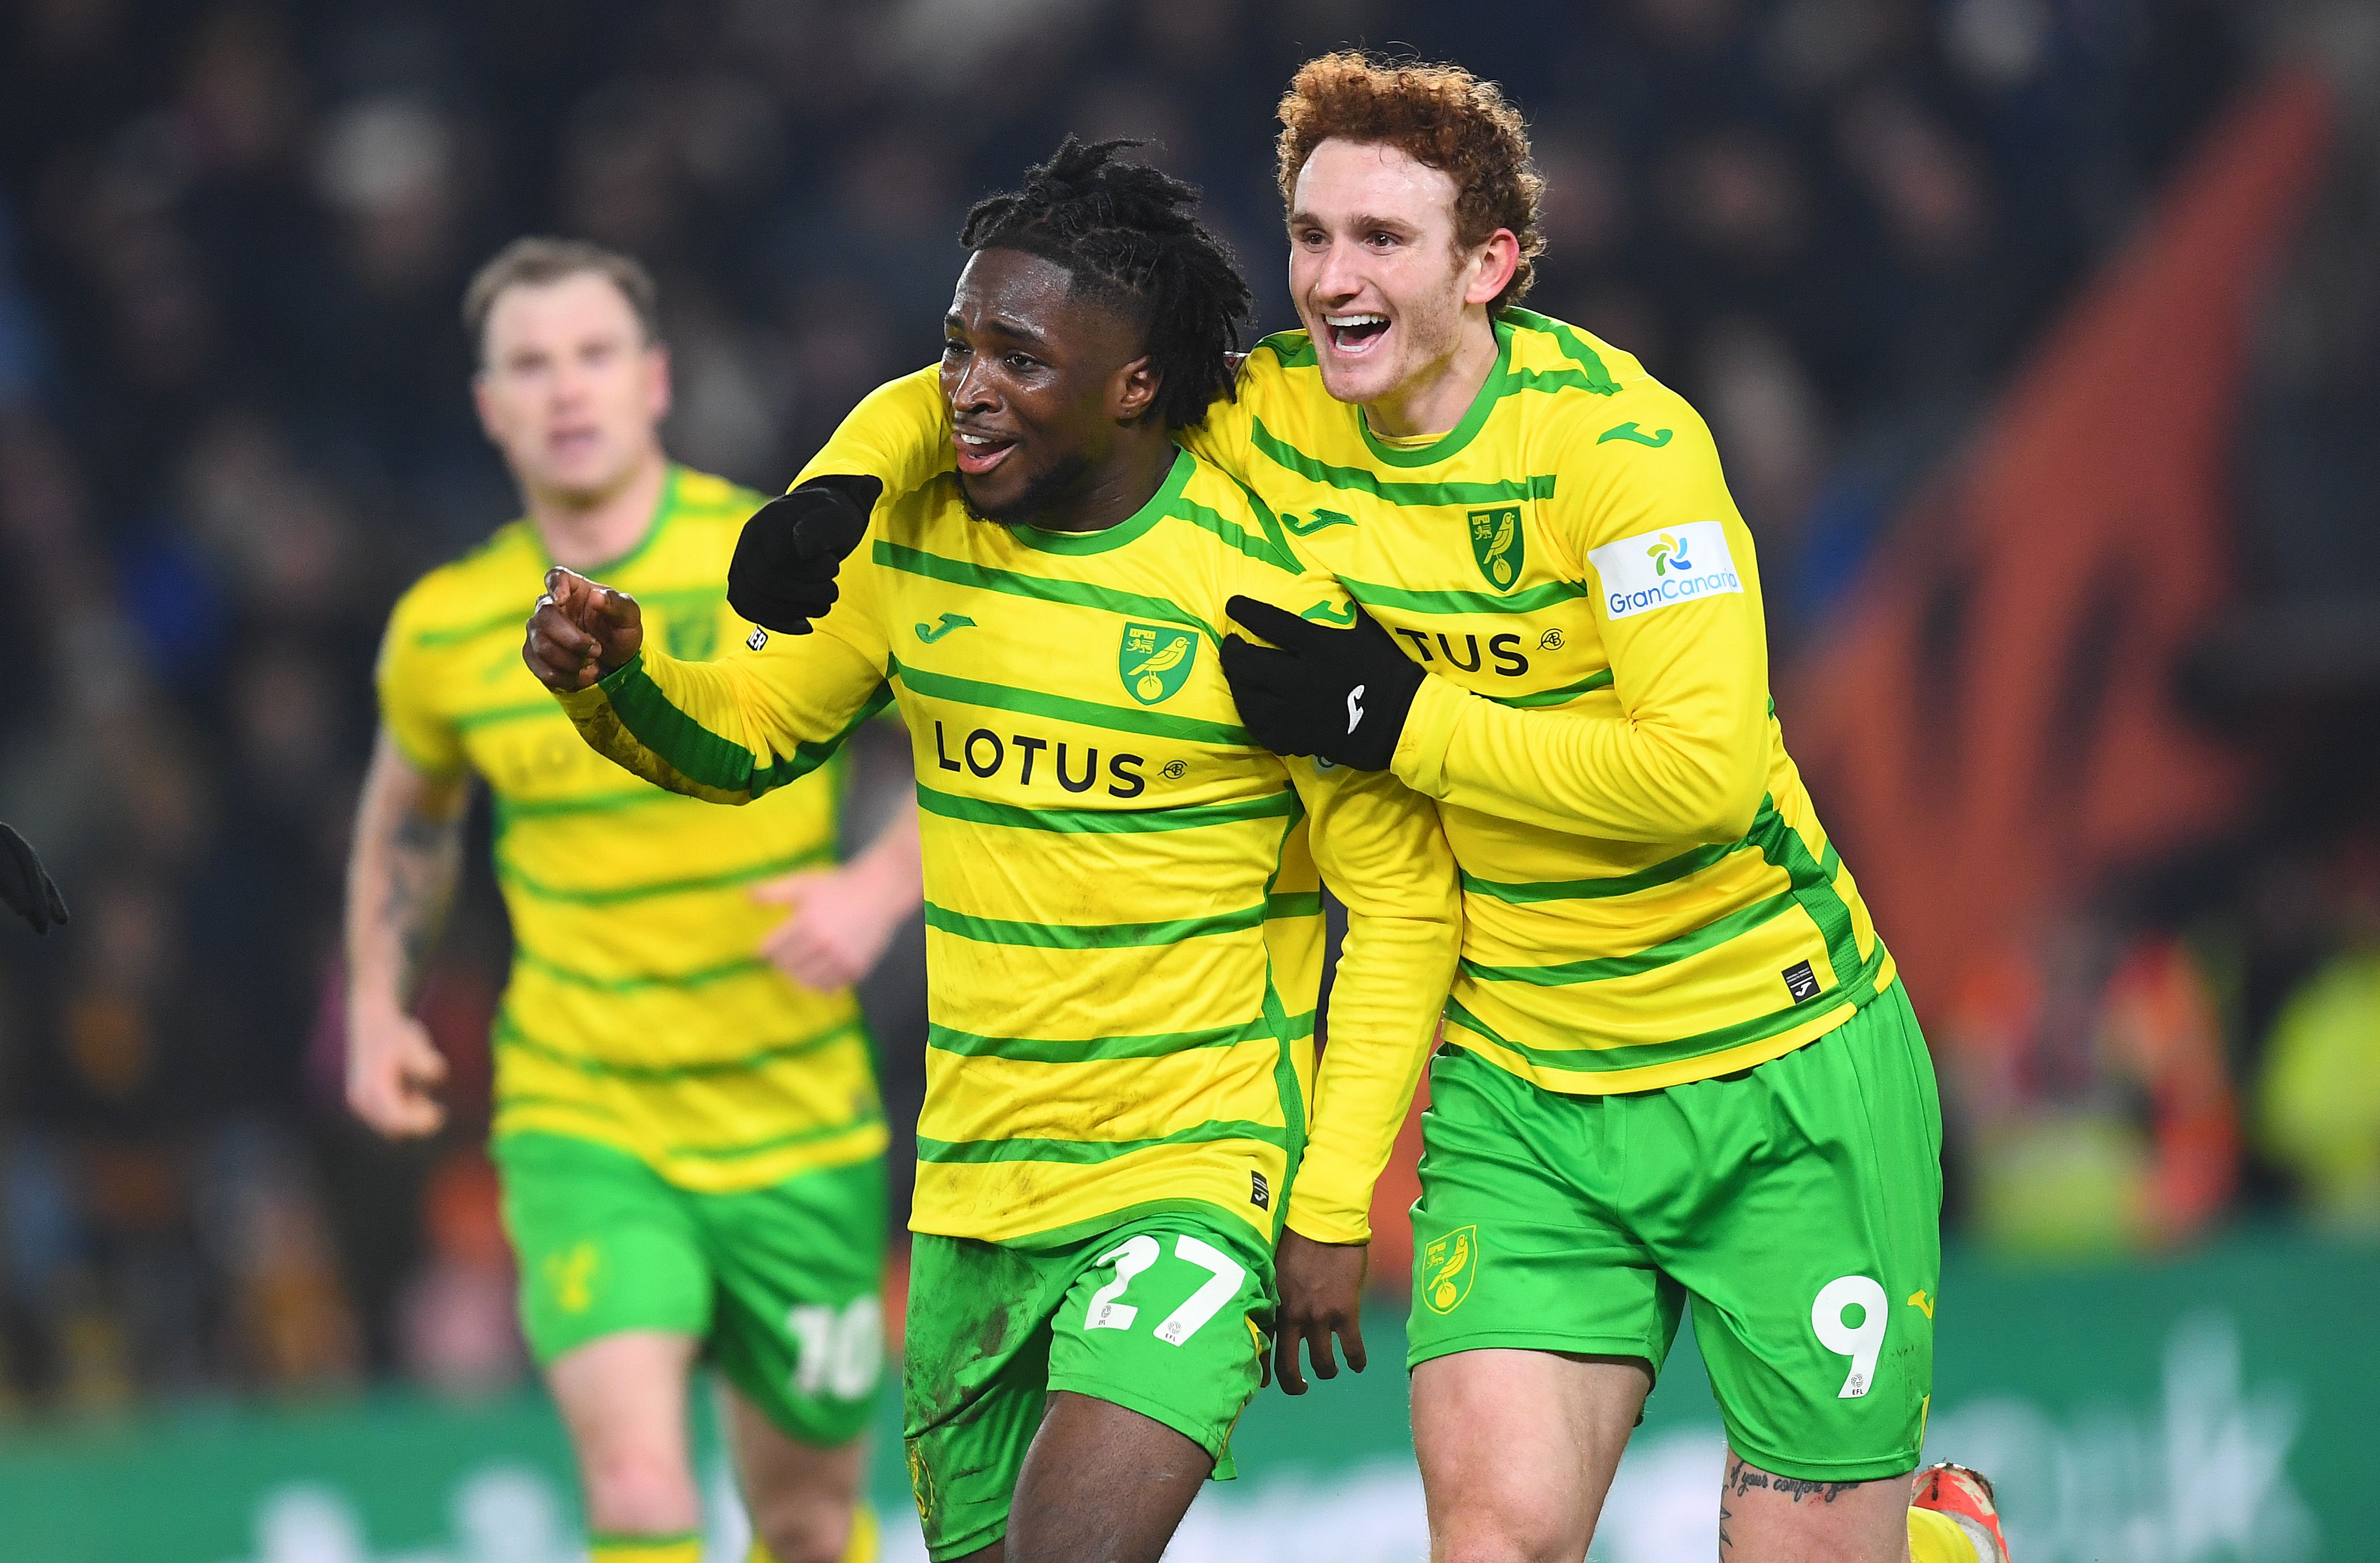 Norwich players Jonathan Rowe and Josh Sargent celebrate a goal